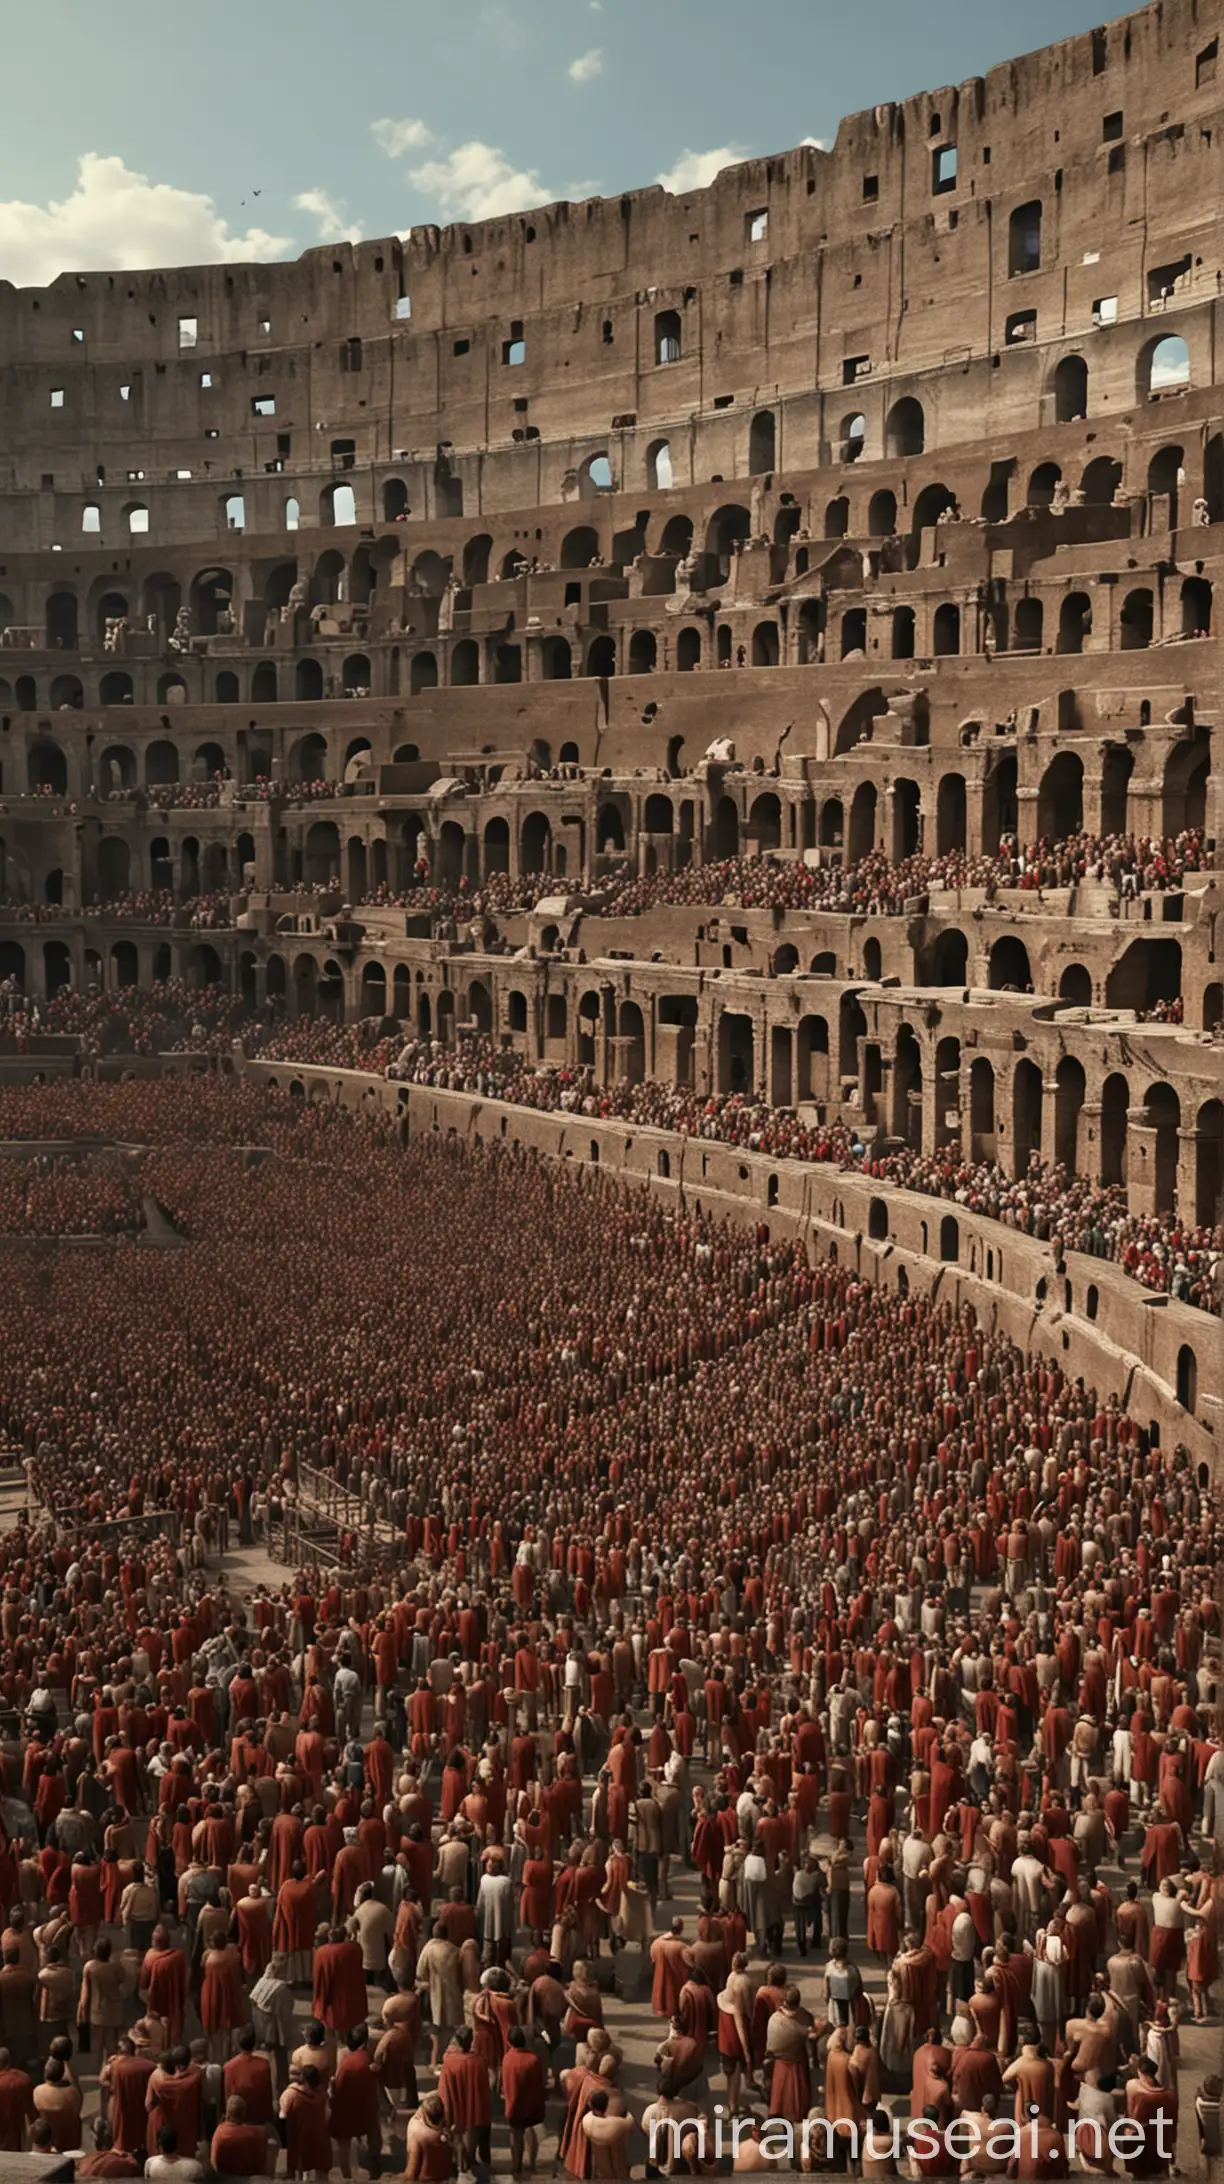 Show a dramatic clip of the Roman Colosseum with cheering crowds. hyper realistic